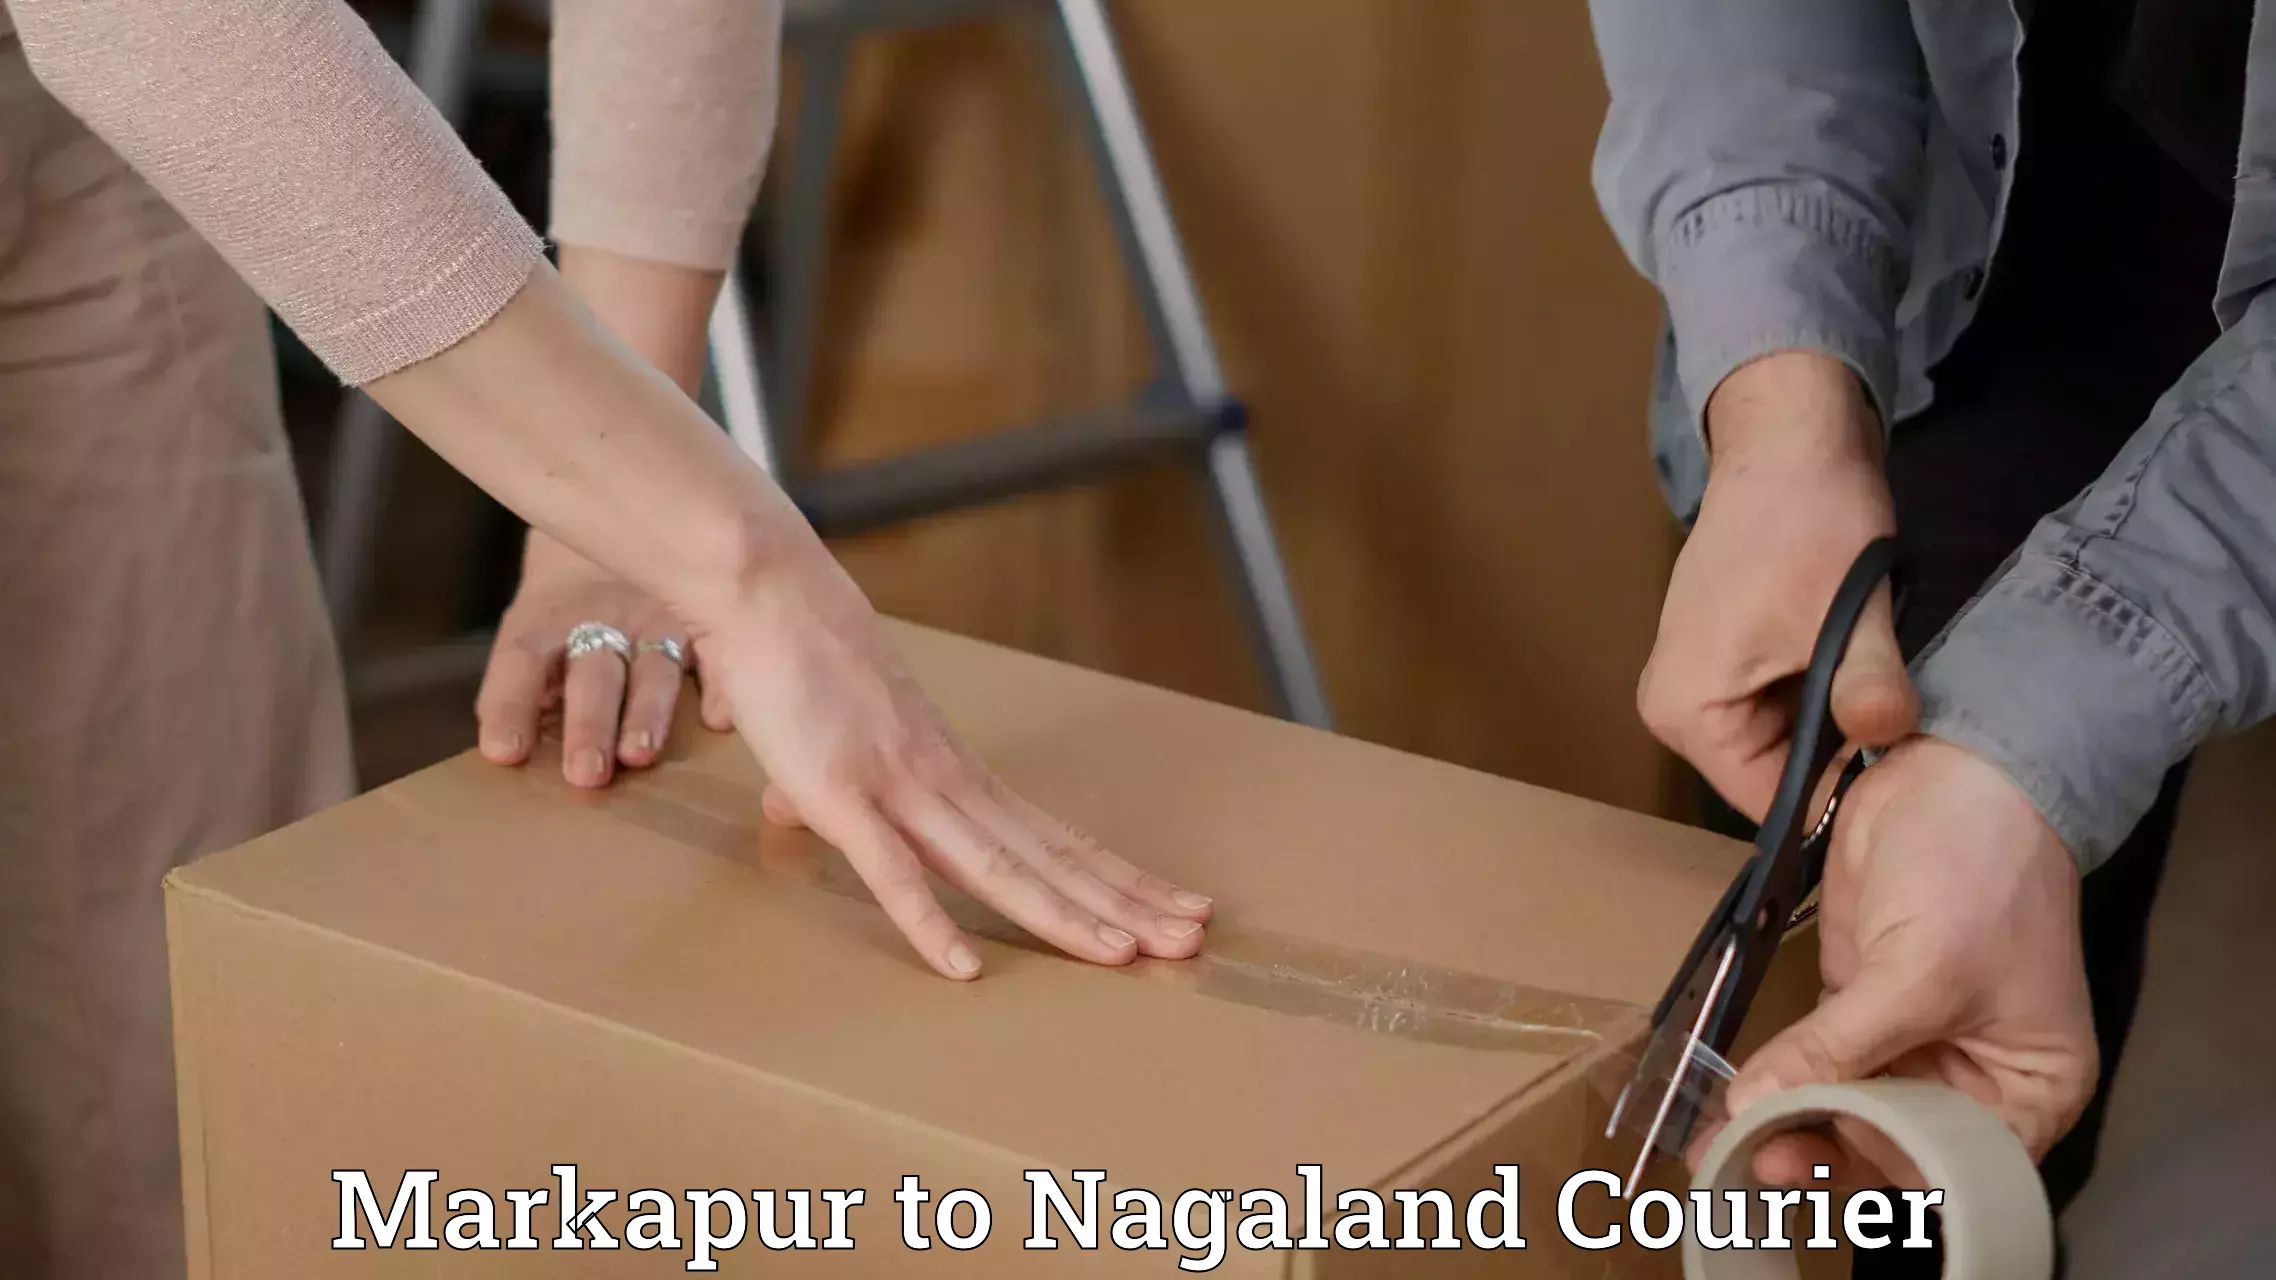 Enhanced tracking features Markapur to Nagaland